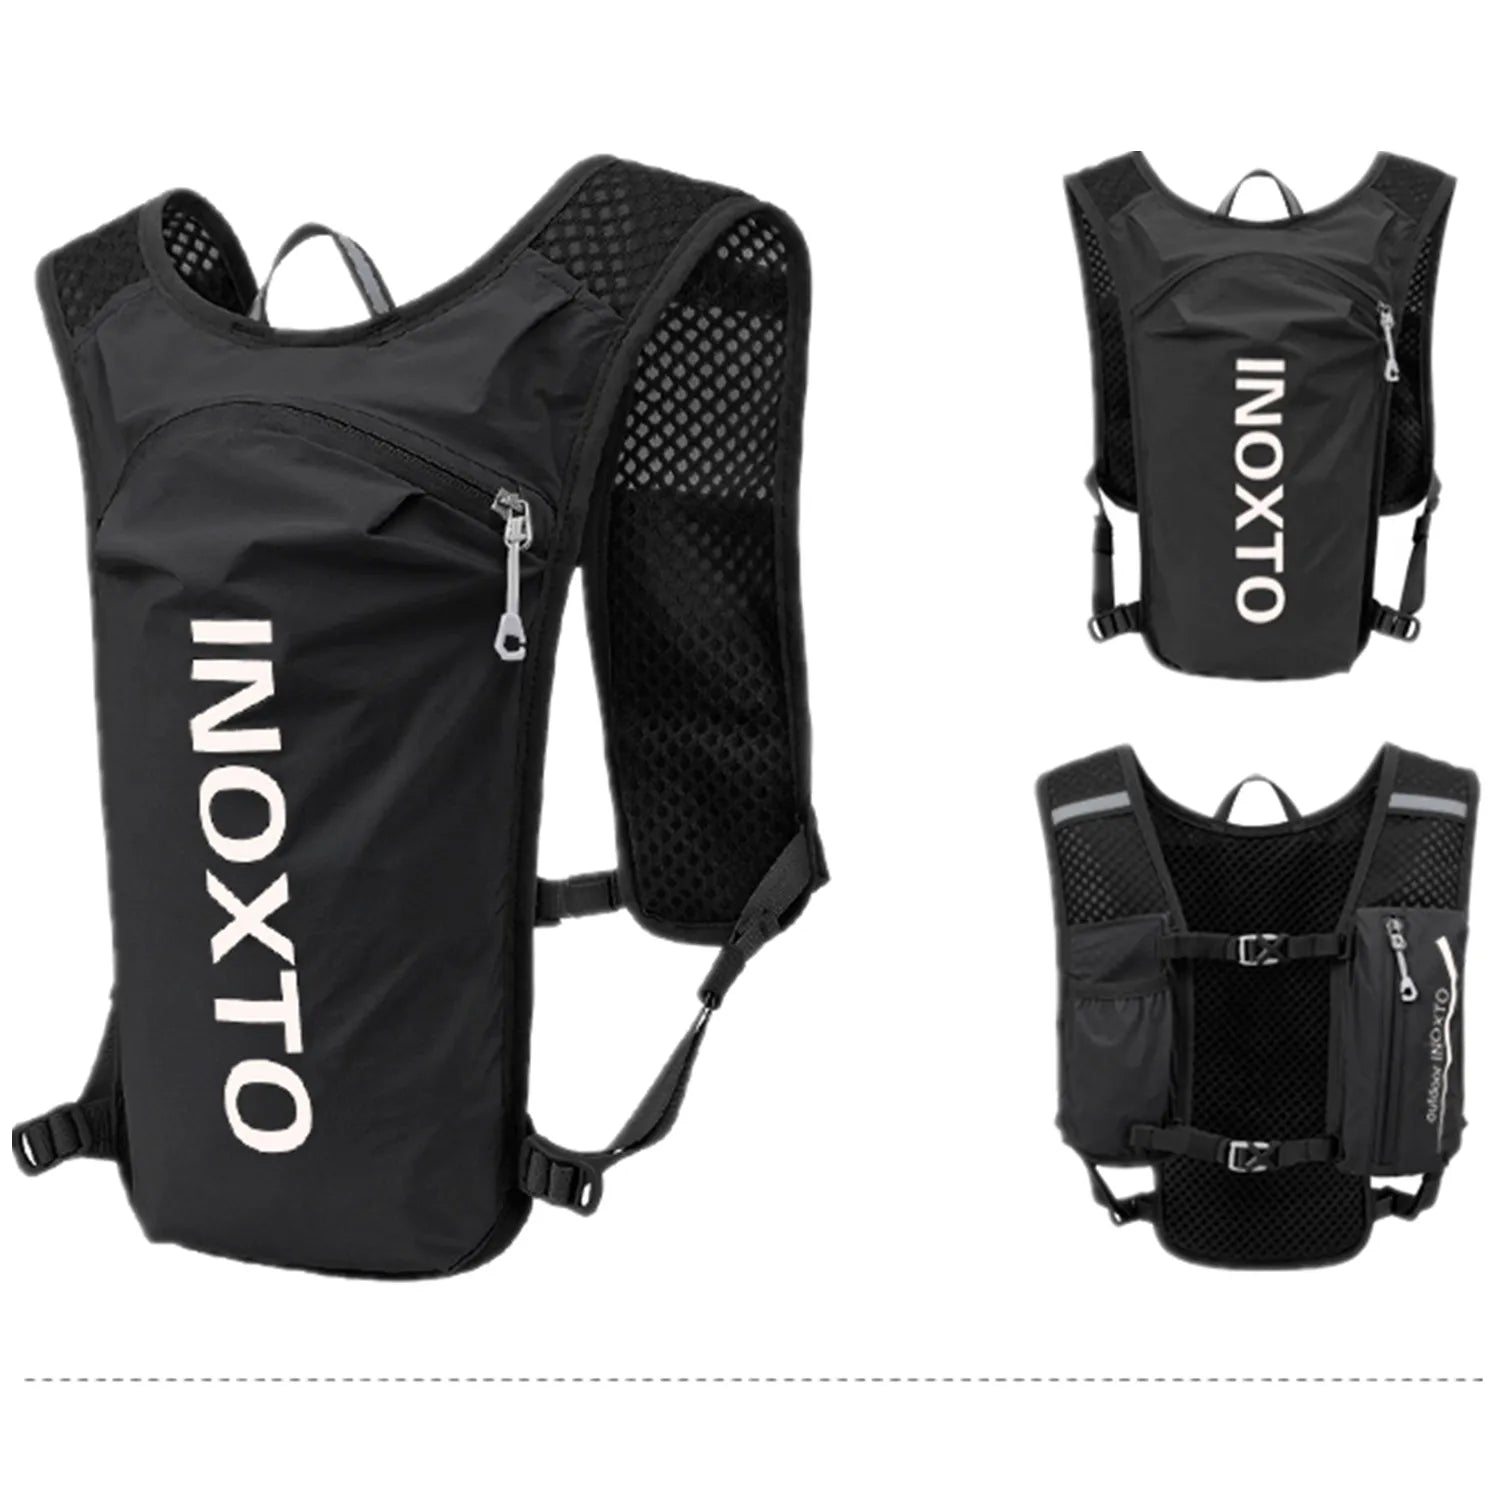 INOXTO New waterproof running backpack 5L ultra-light hydration vest mountain bike leather bag breathable gym bag 1.5L water bag